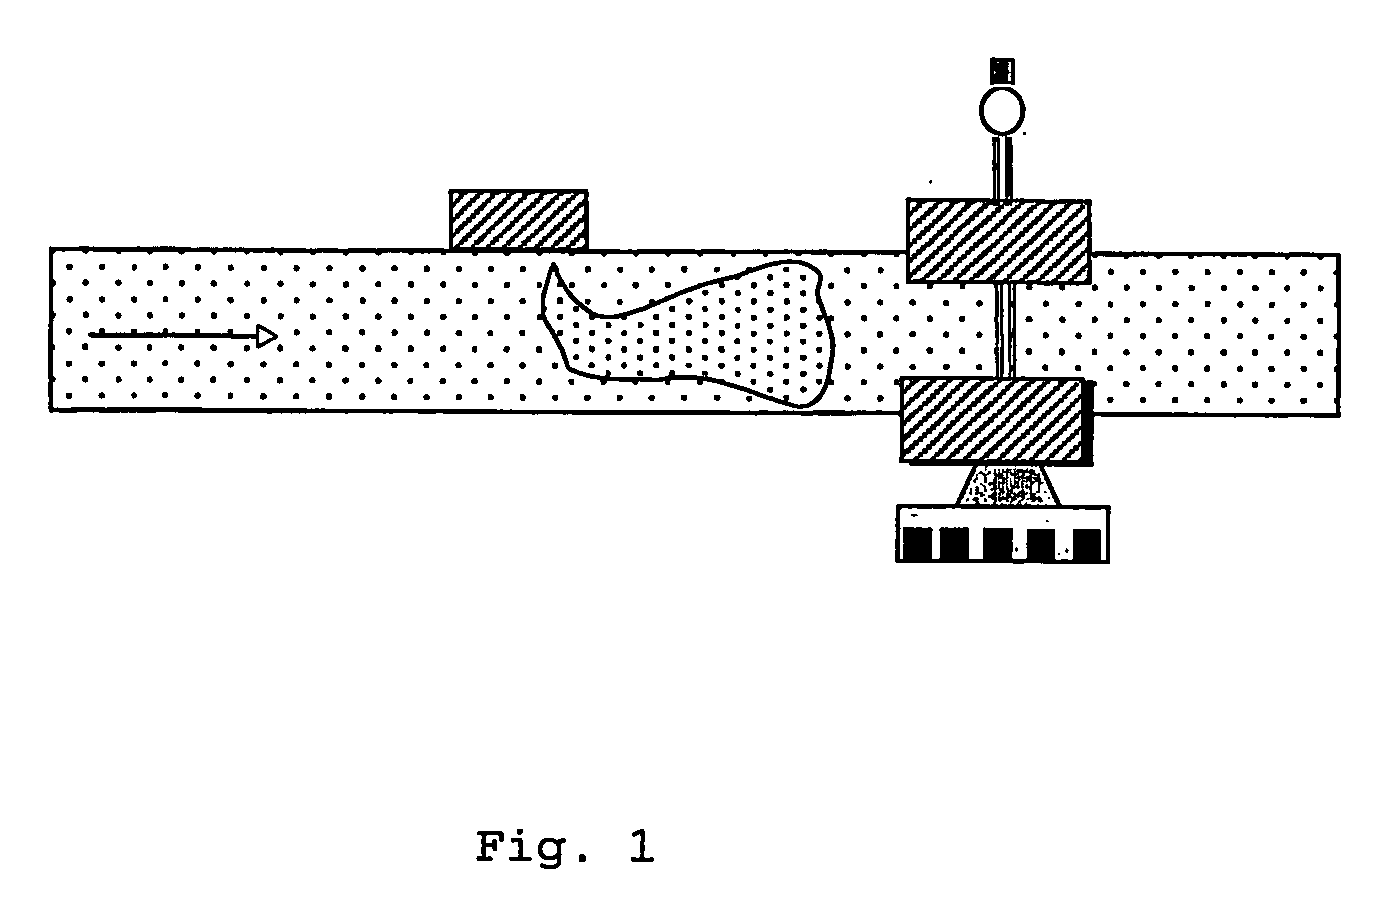 Apparatus and method for analysing downhole water chemistry